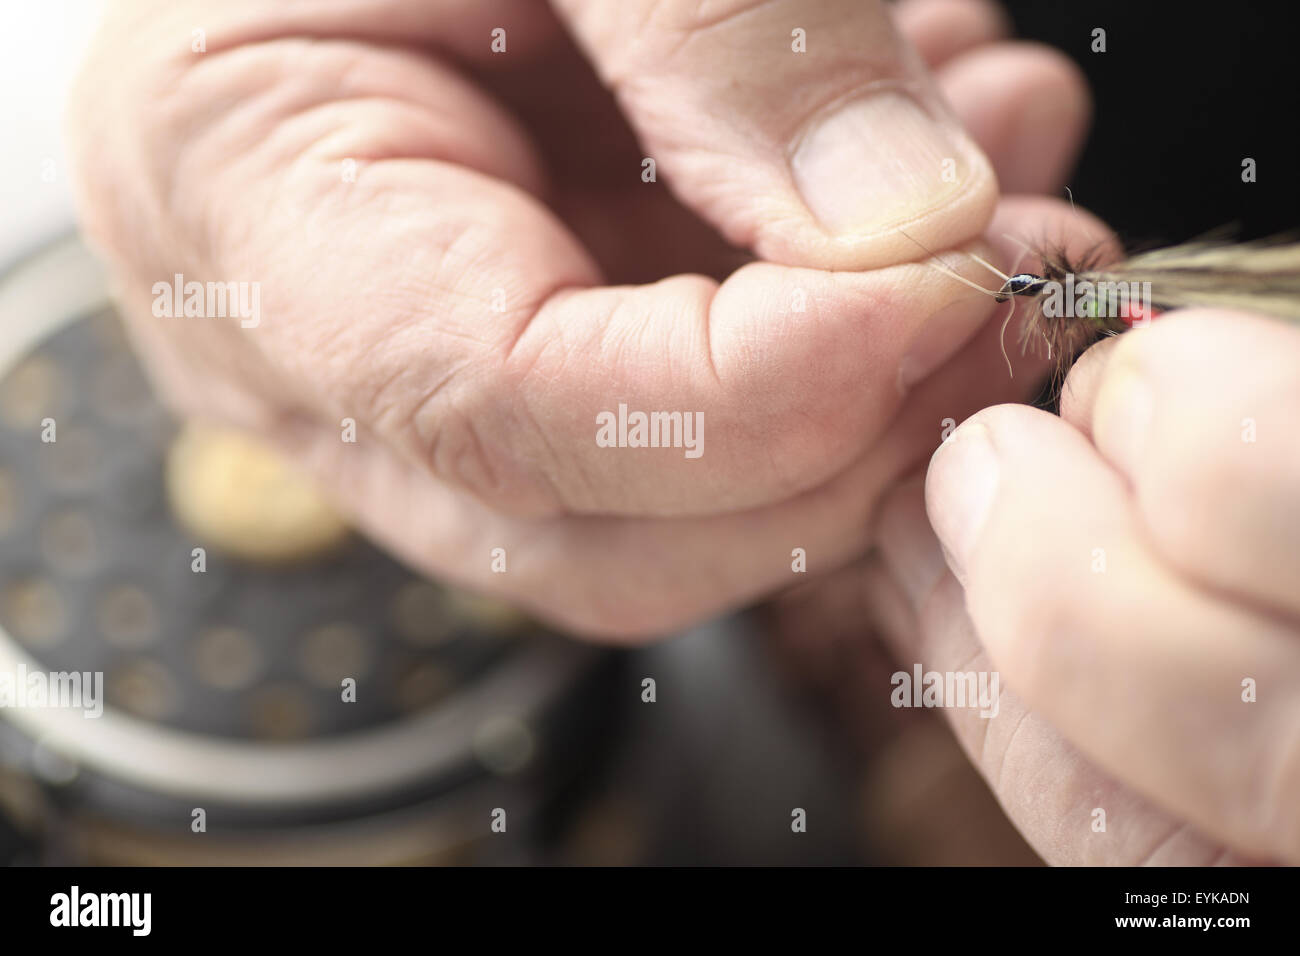 Closeup view of a man holding an imitation insect artificial fly, fishing reel in background Stock Photo